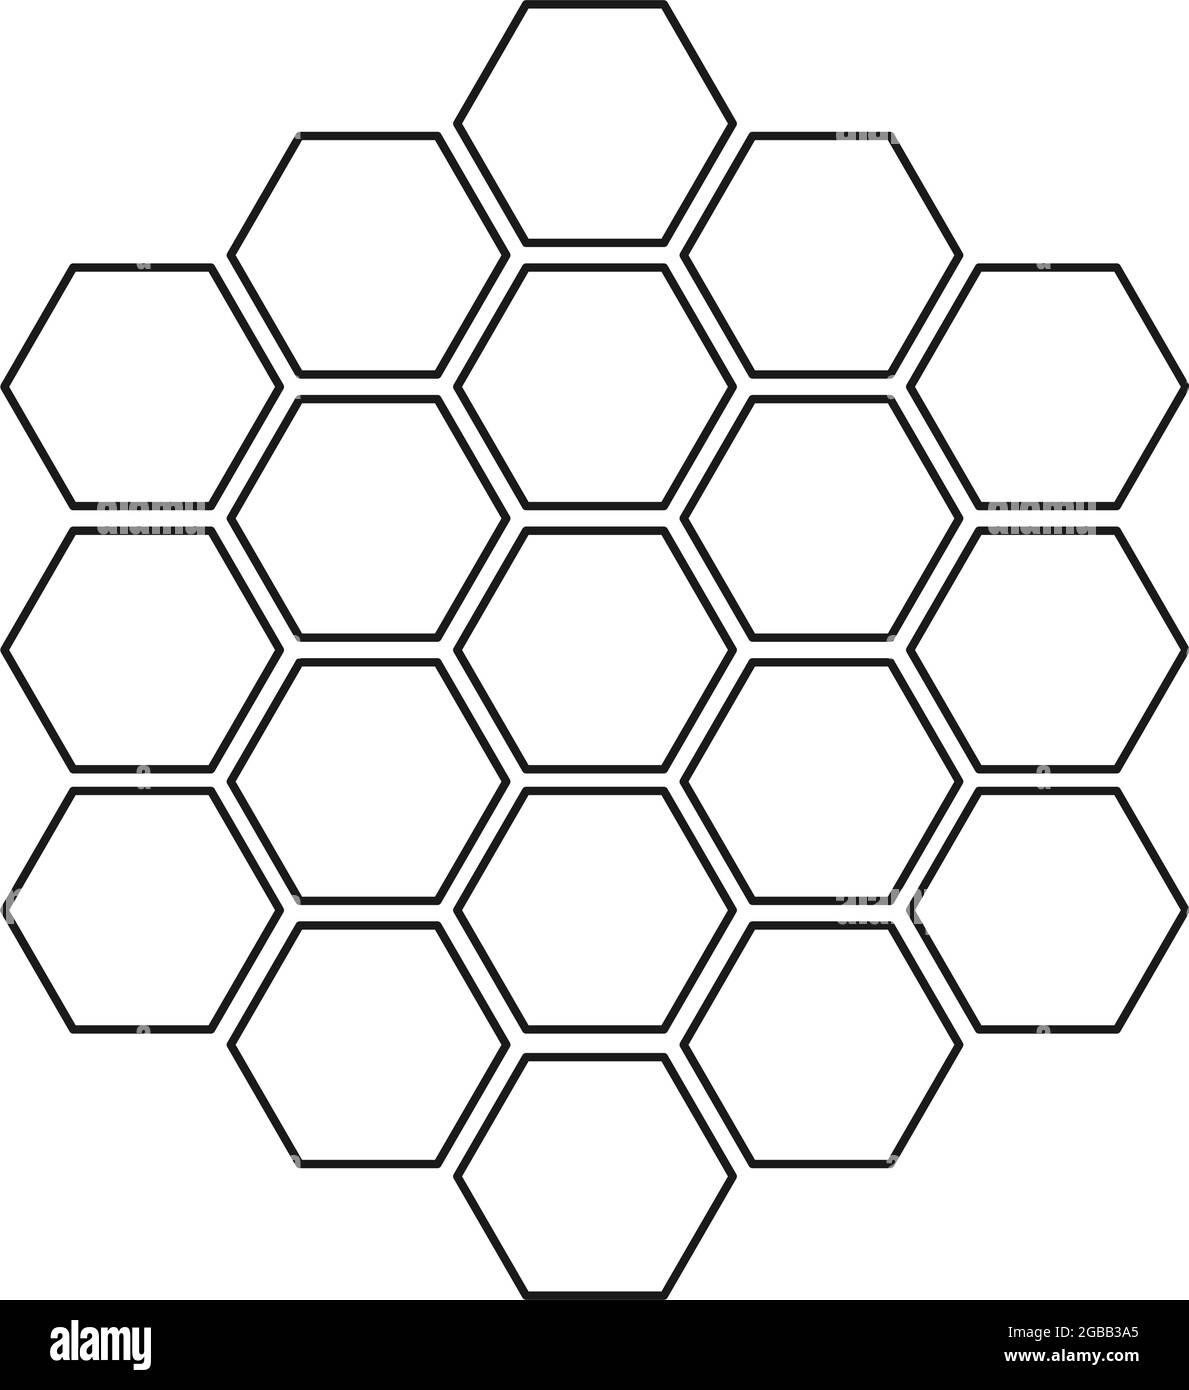 Hexagon Pattern Cut Out Stock Images Pictures Alamy